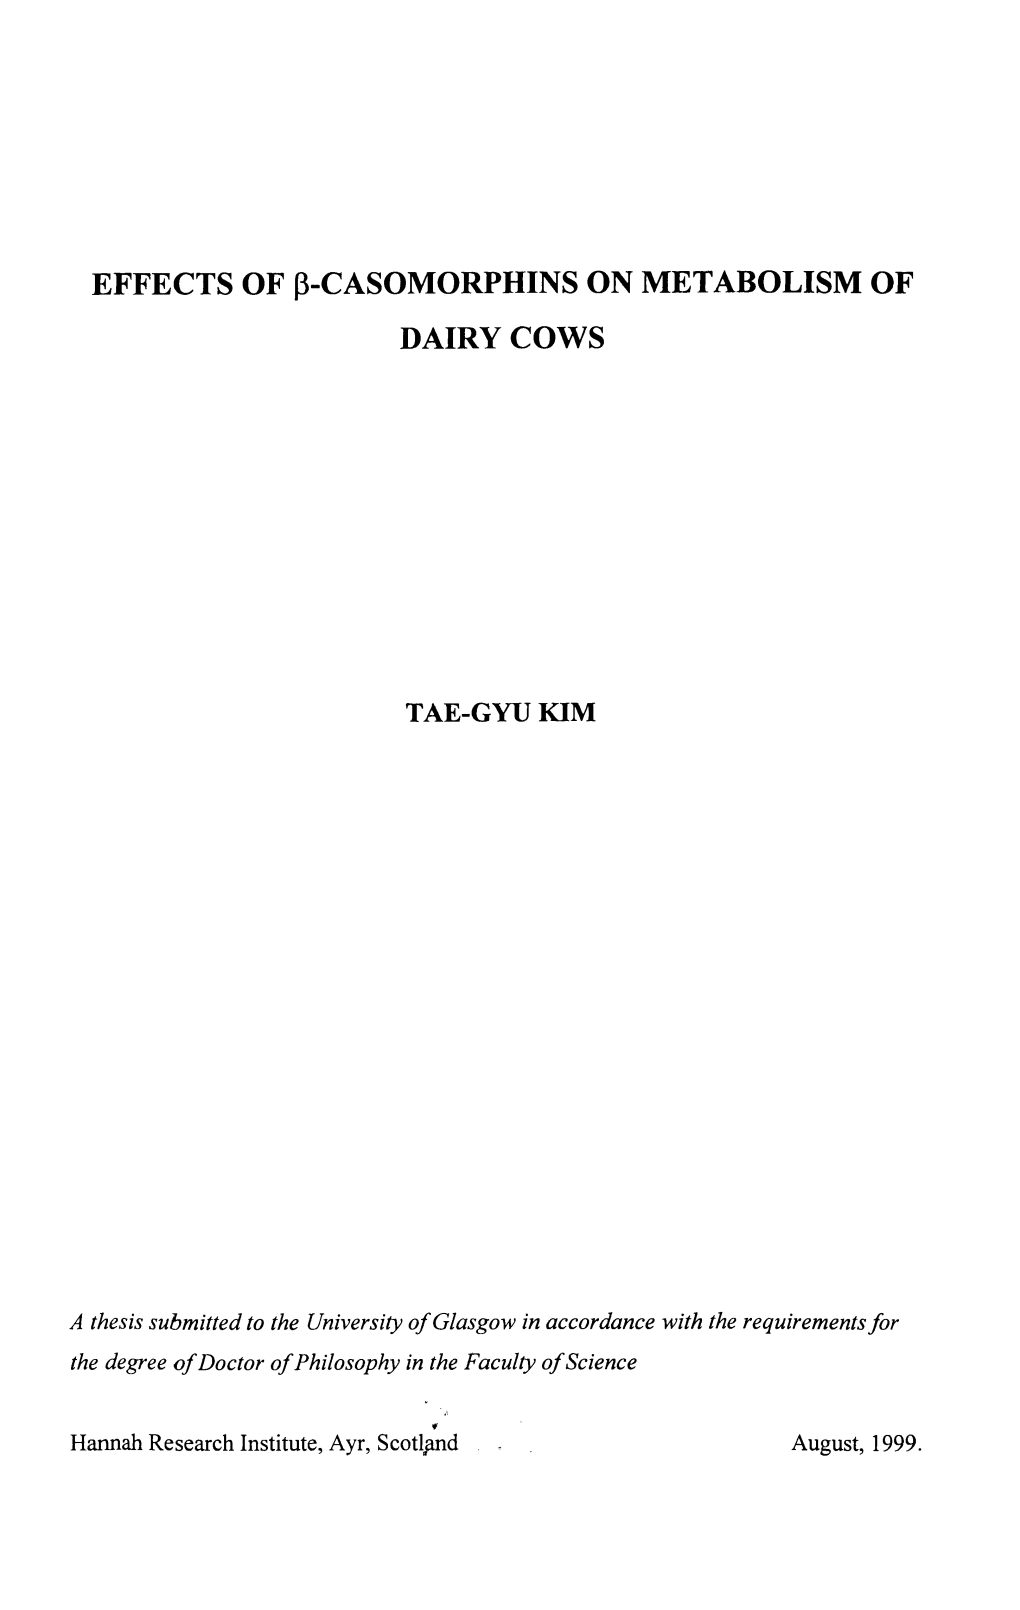 EFFECTS of P-CASOMORPHINS on METABOLISM of DAIRY COWS